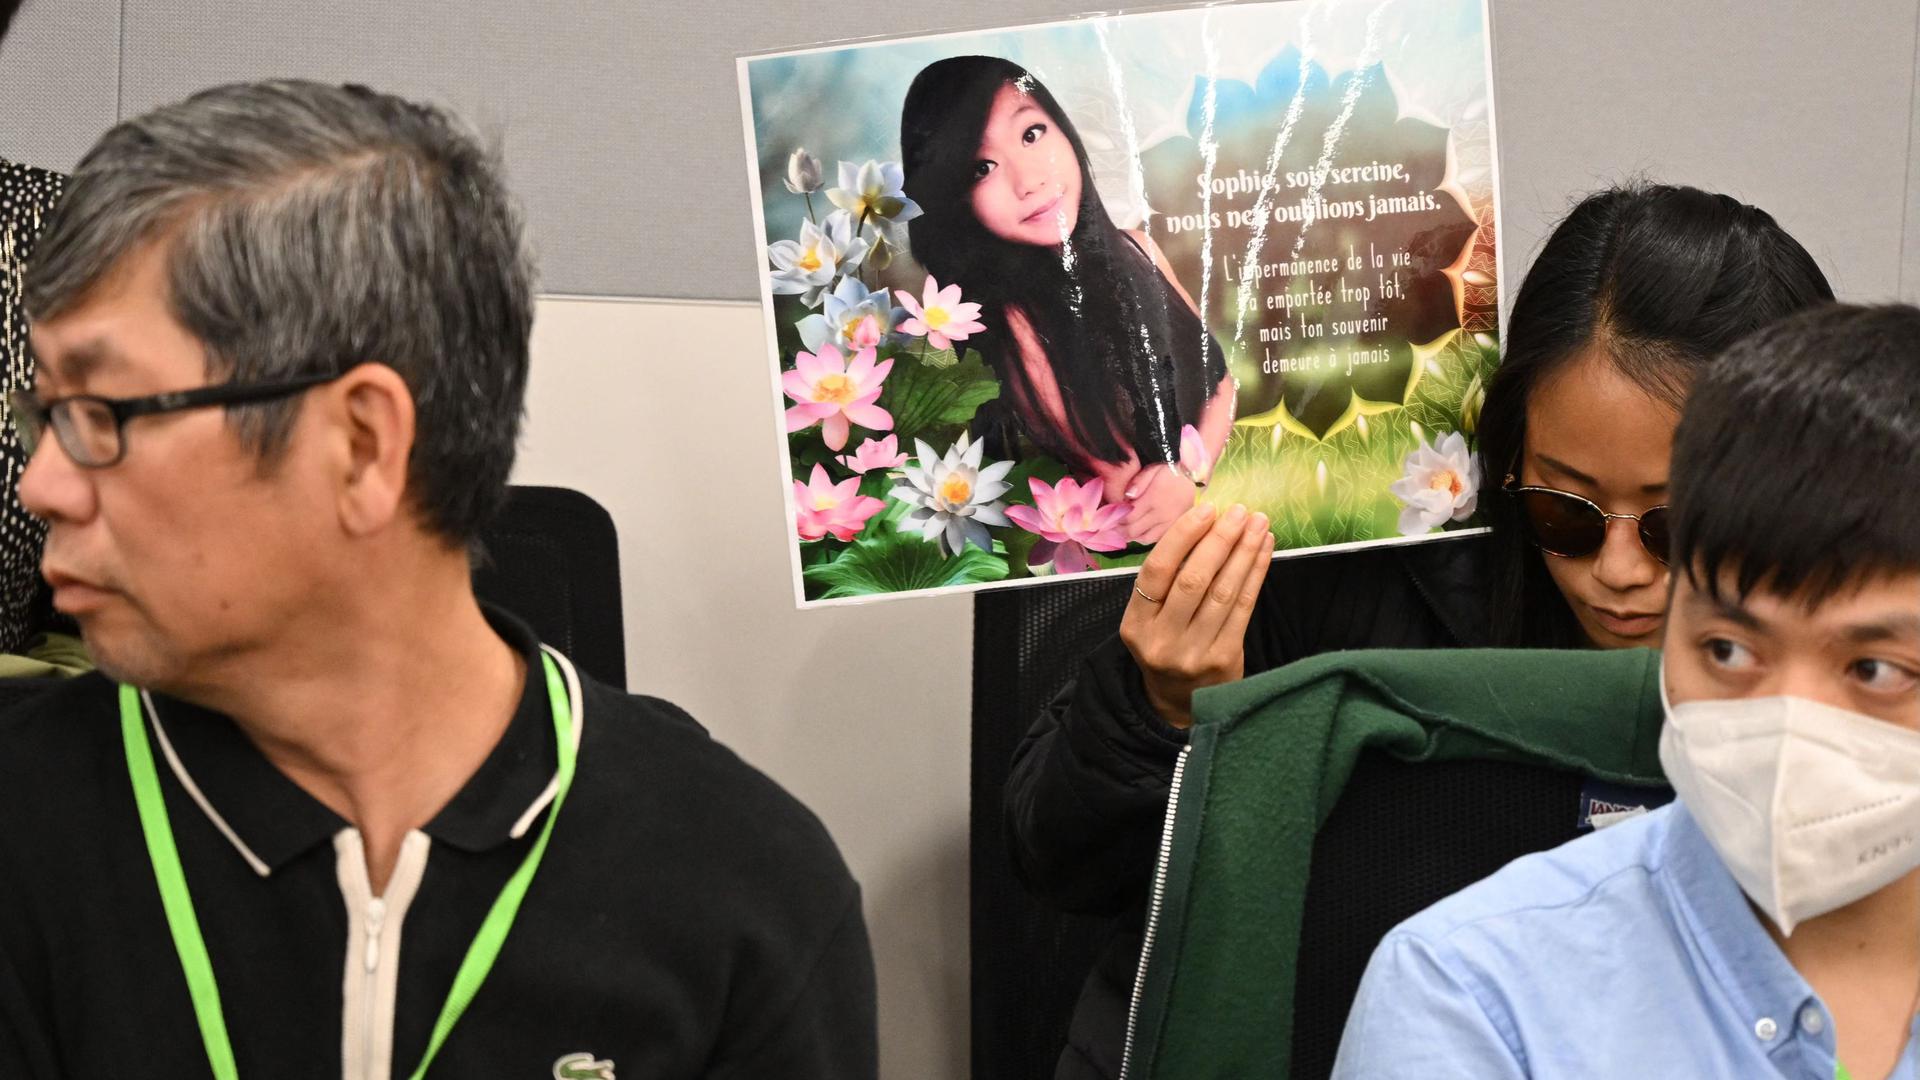 A relative of Sophie Le Tan holds a portrait in the courthouse of Strasbourg, eastern France, on June 27, 2022, ahead of the first day of Jean-Marc Reiser's trial, accused of murdering student Sophie Le Tan in 2018. (Photo by Frederick FLORIN / AFP)